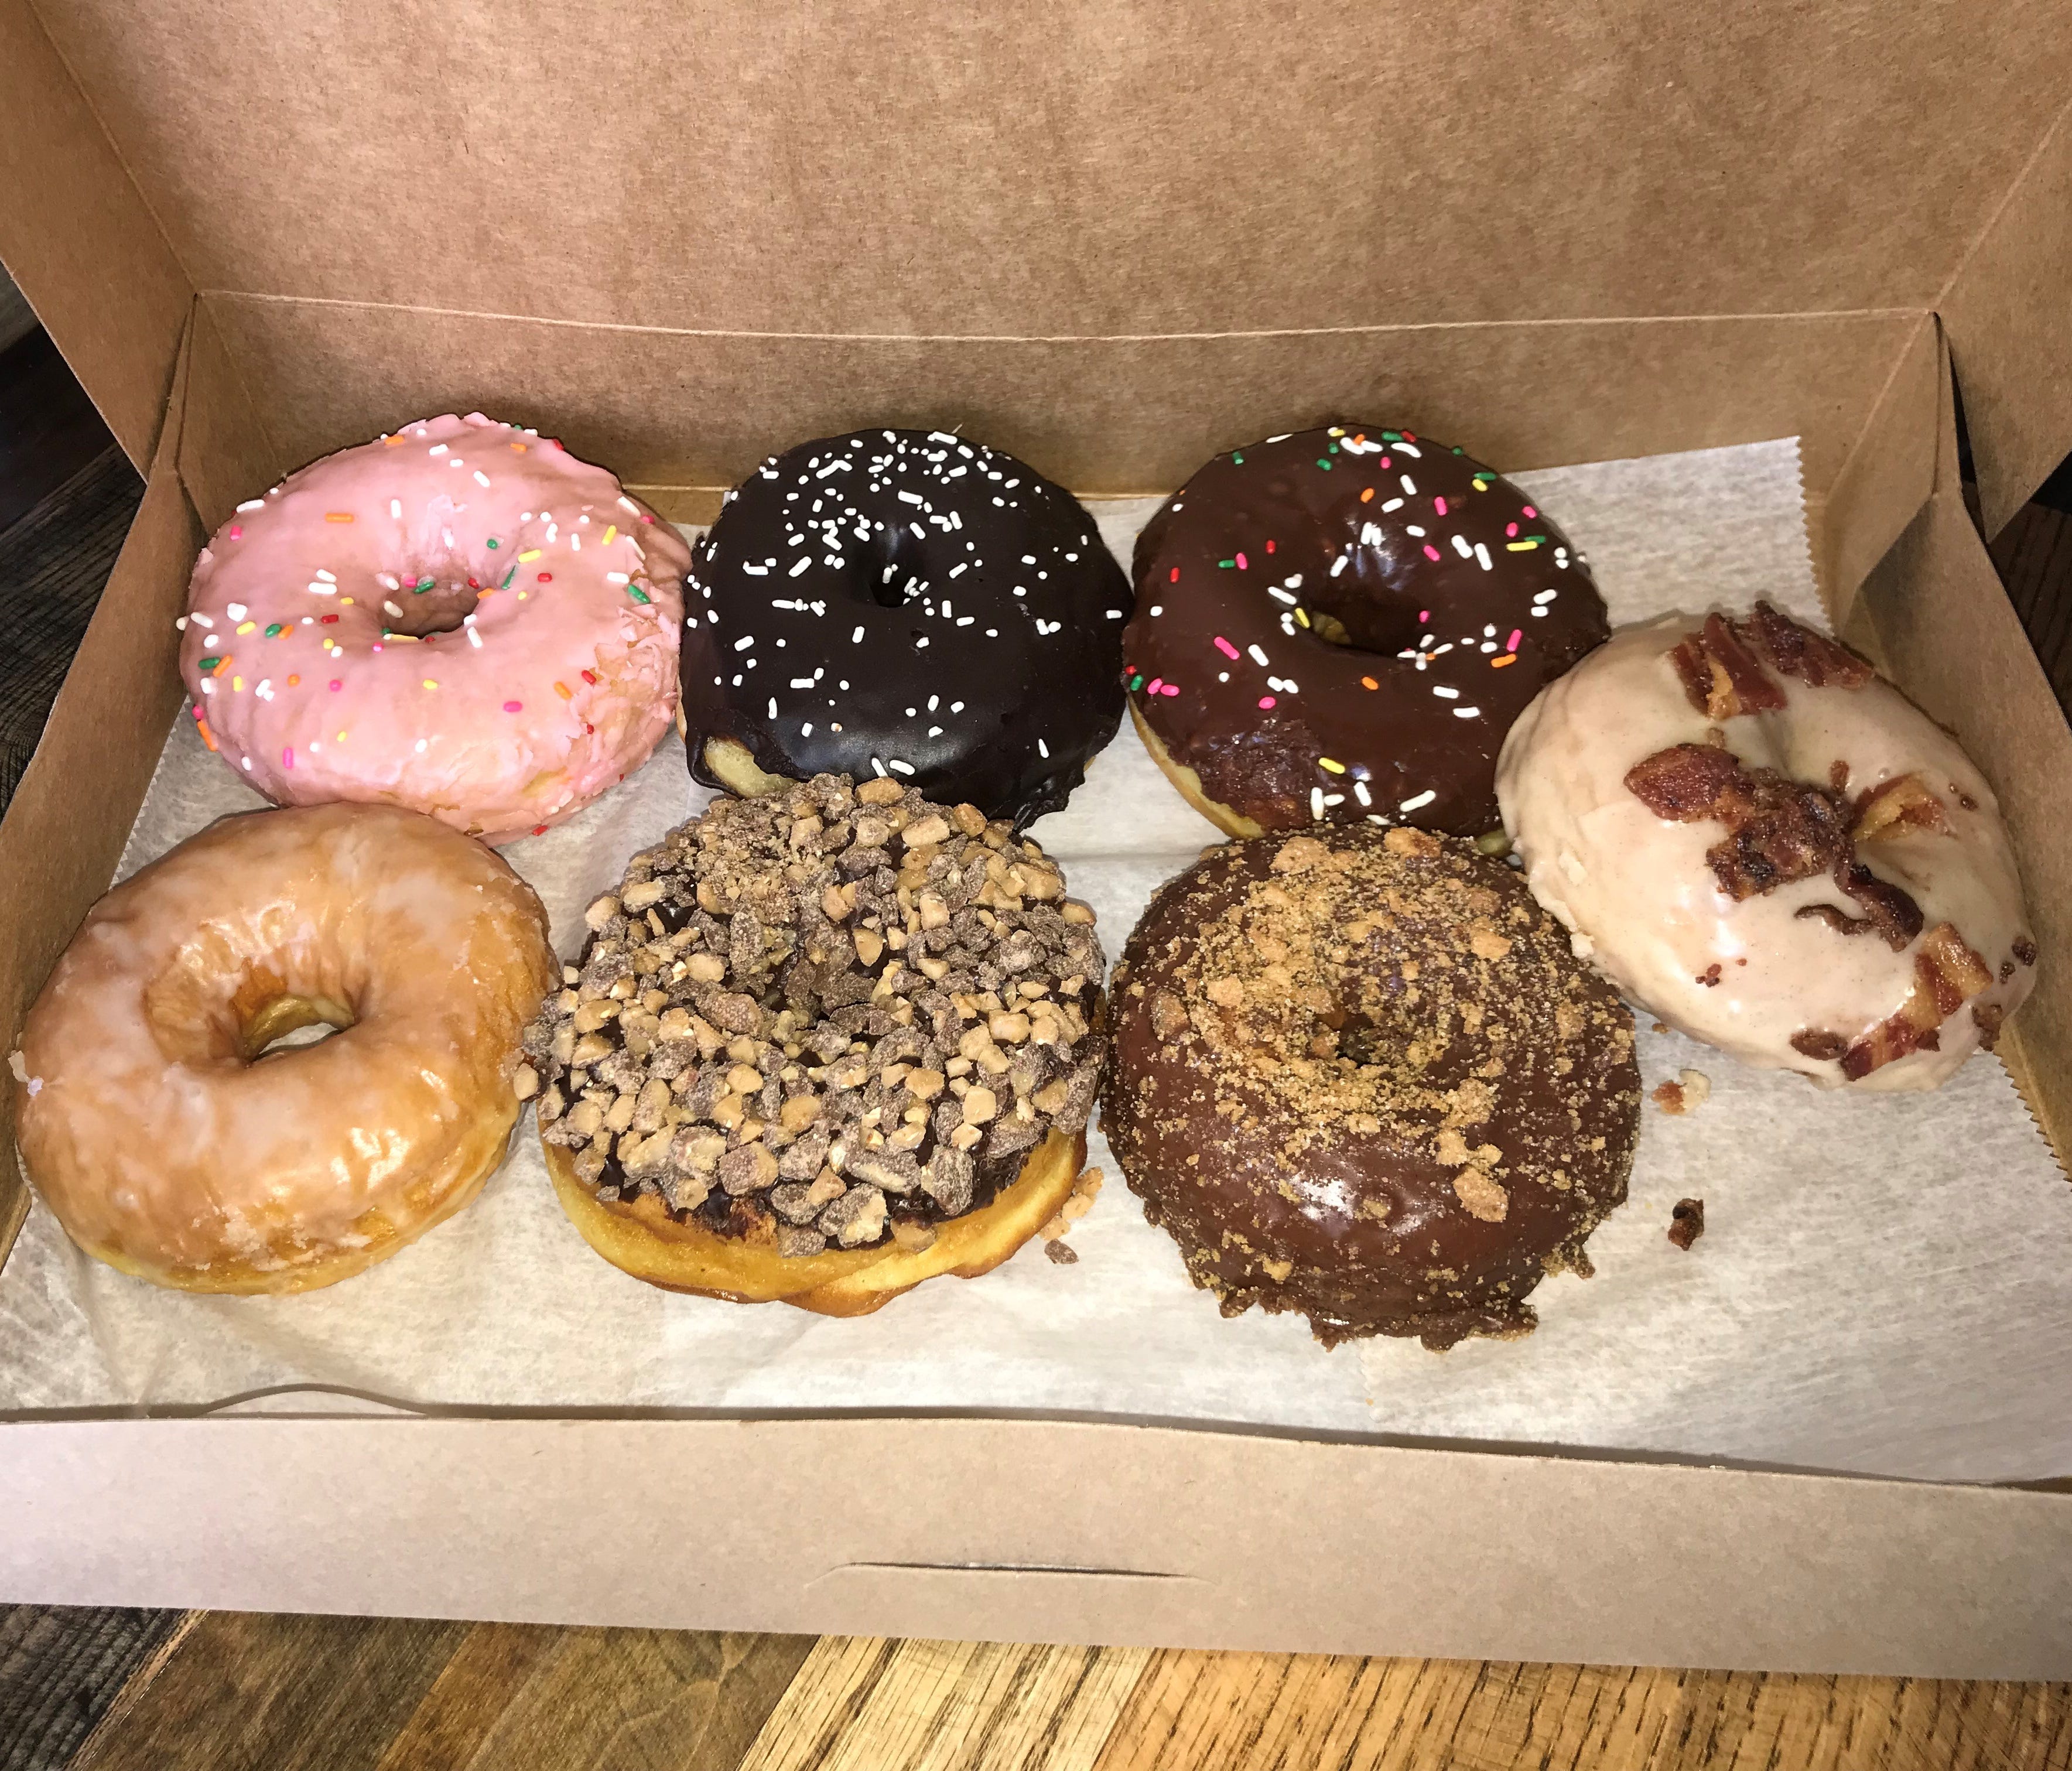 A box of seven Brewnuts offers a sampling of the flavors.